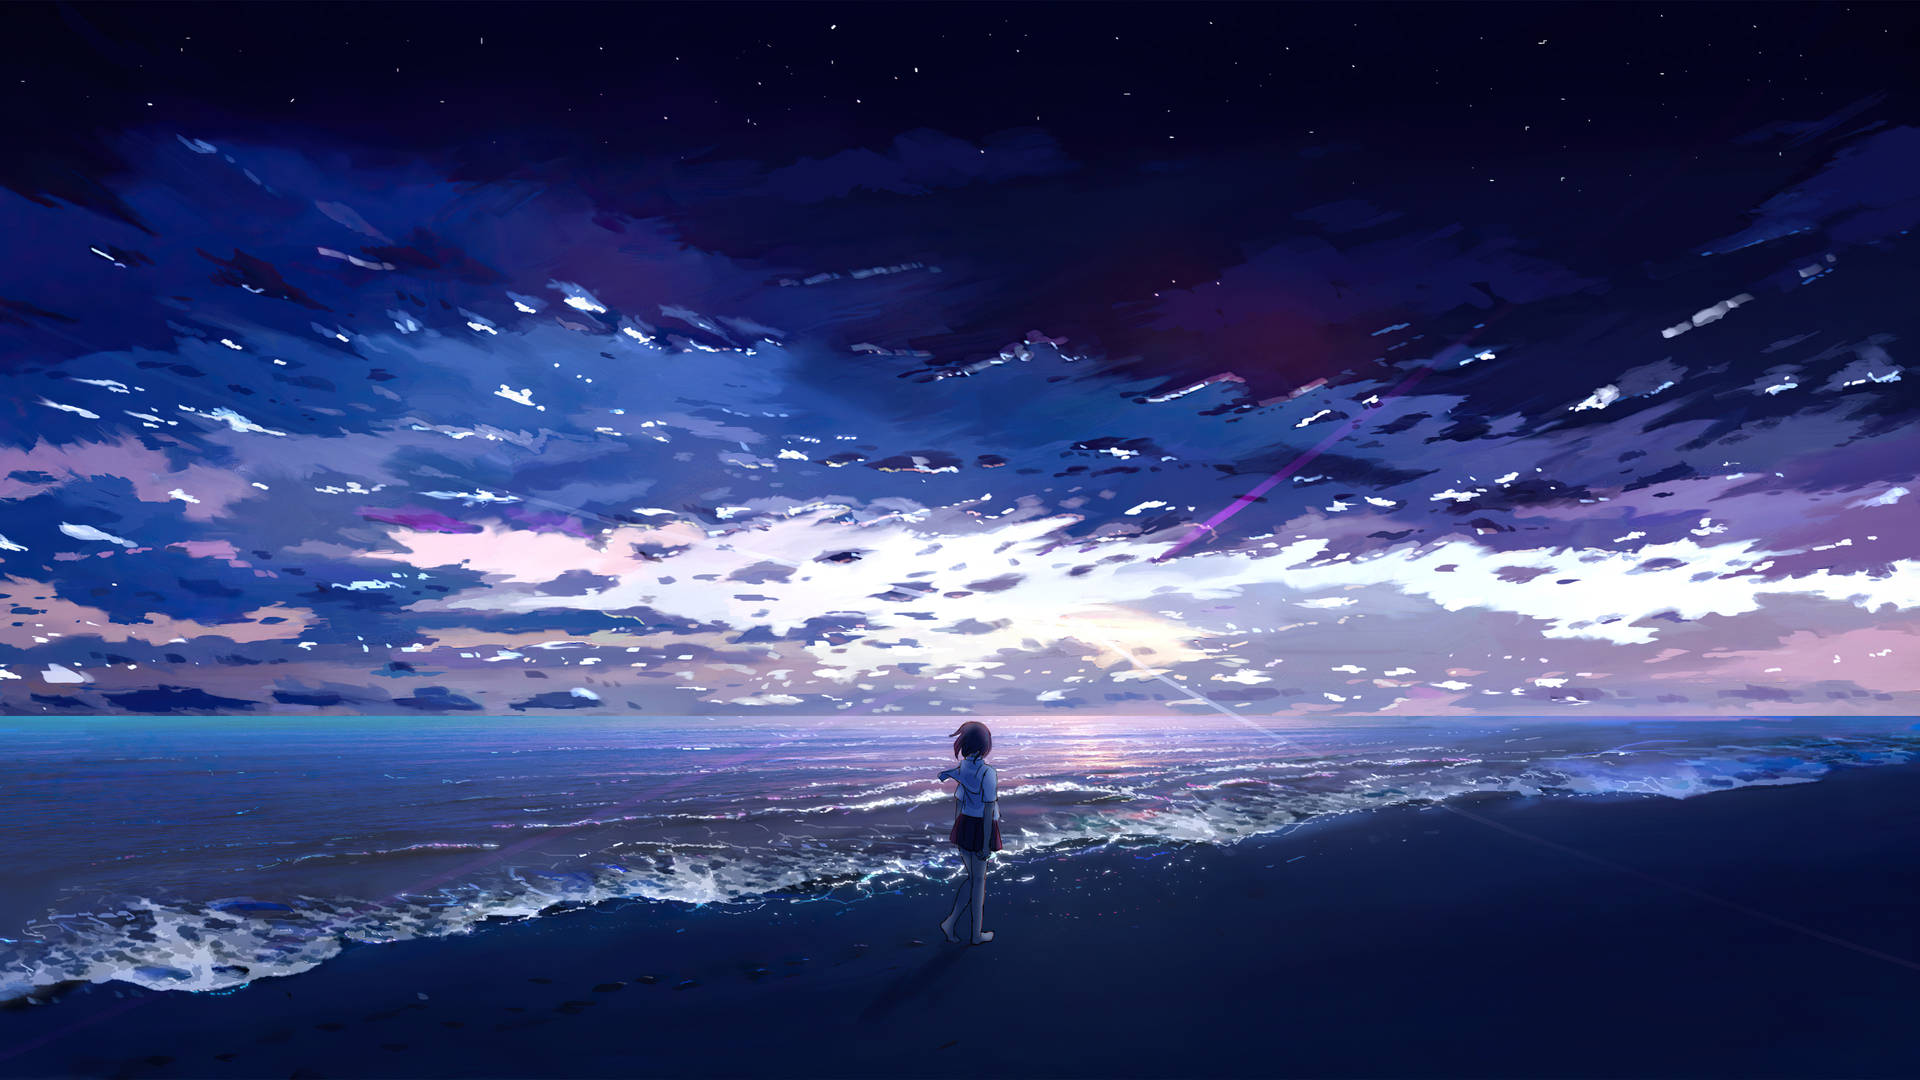 Download Anime Girl And Sea Background Wallpaper | Wallpapers.com